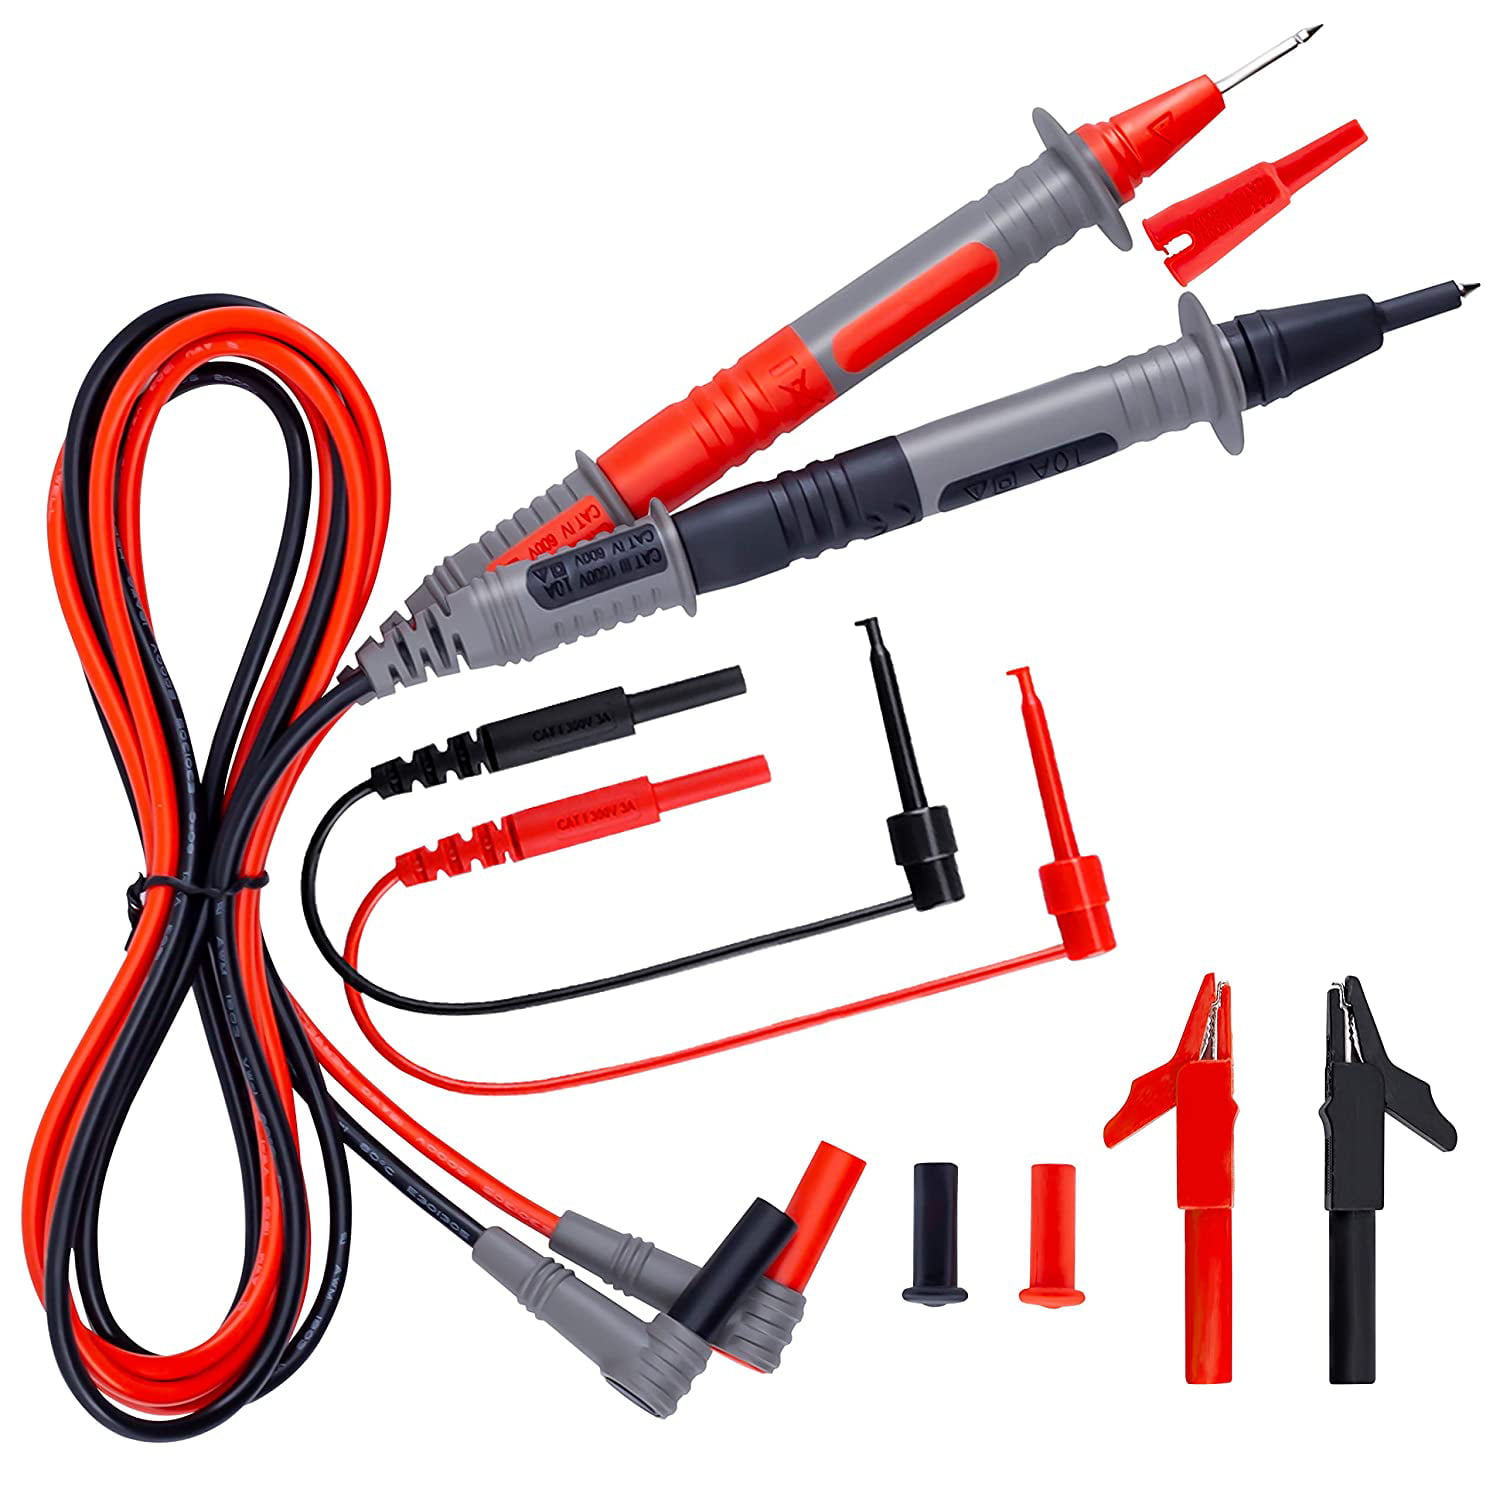 Test Leads for Multimeter Meter Power Clips alligator High Current Soft cable 